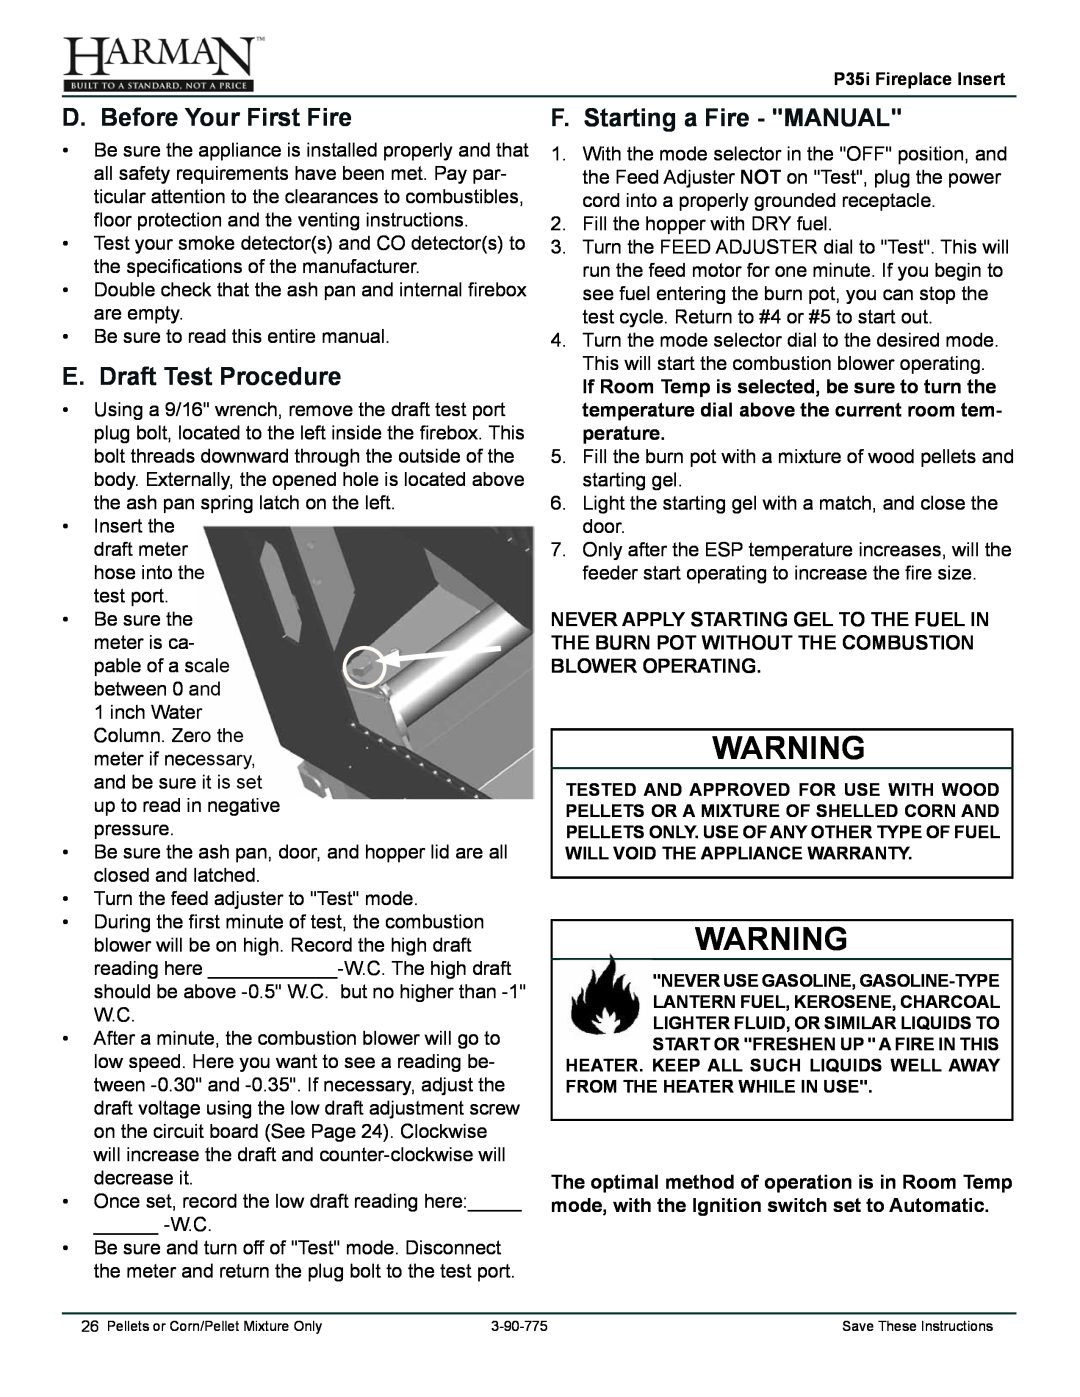 Harman Stove Company P35I owner manual D. Before Your First Fire, E. Draft Test Procedure, F. Starting a Fire - MANUAL 